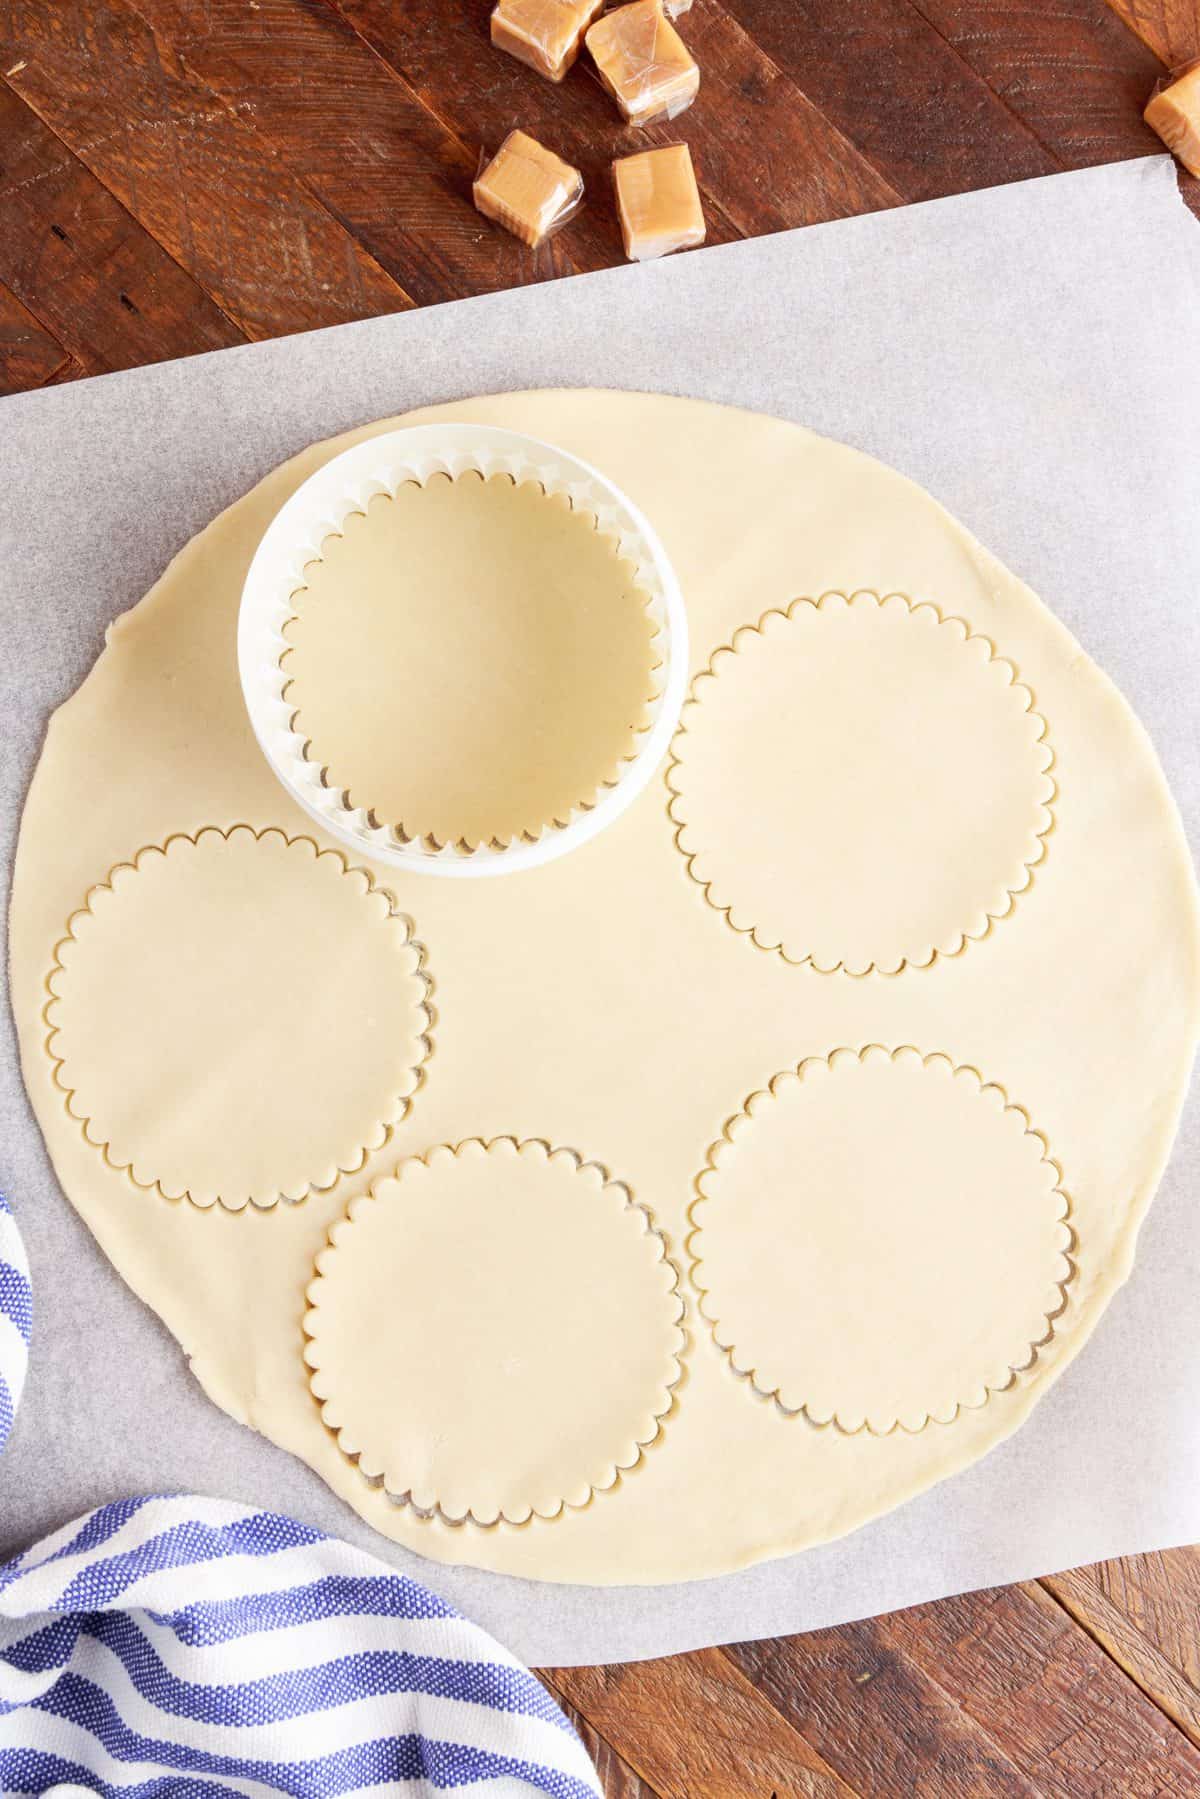 cutting out the round shapes in the pie crusts